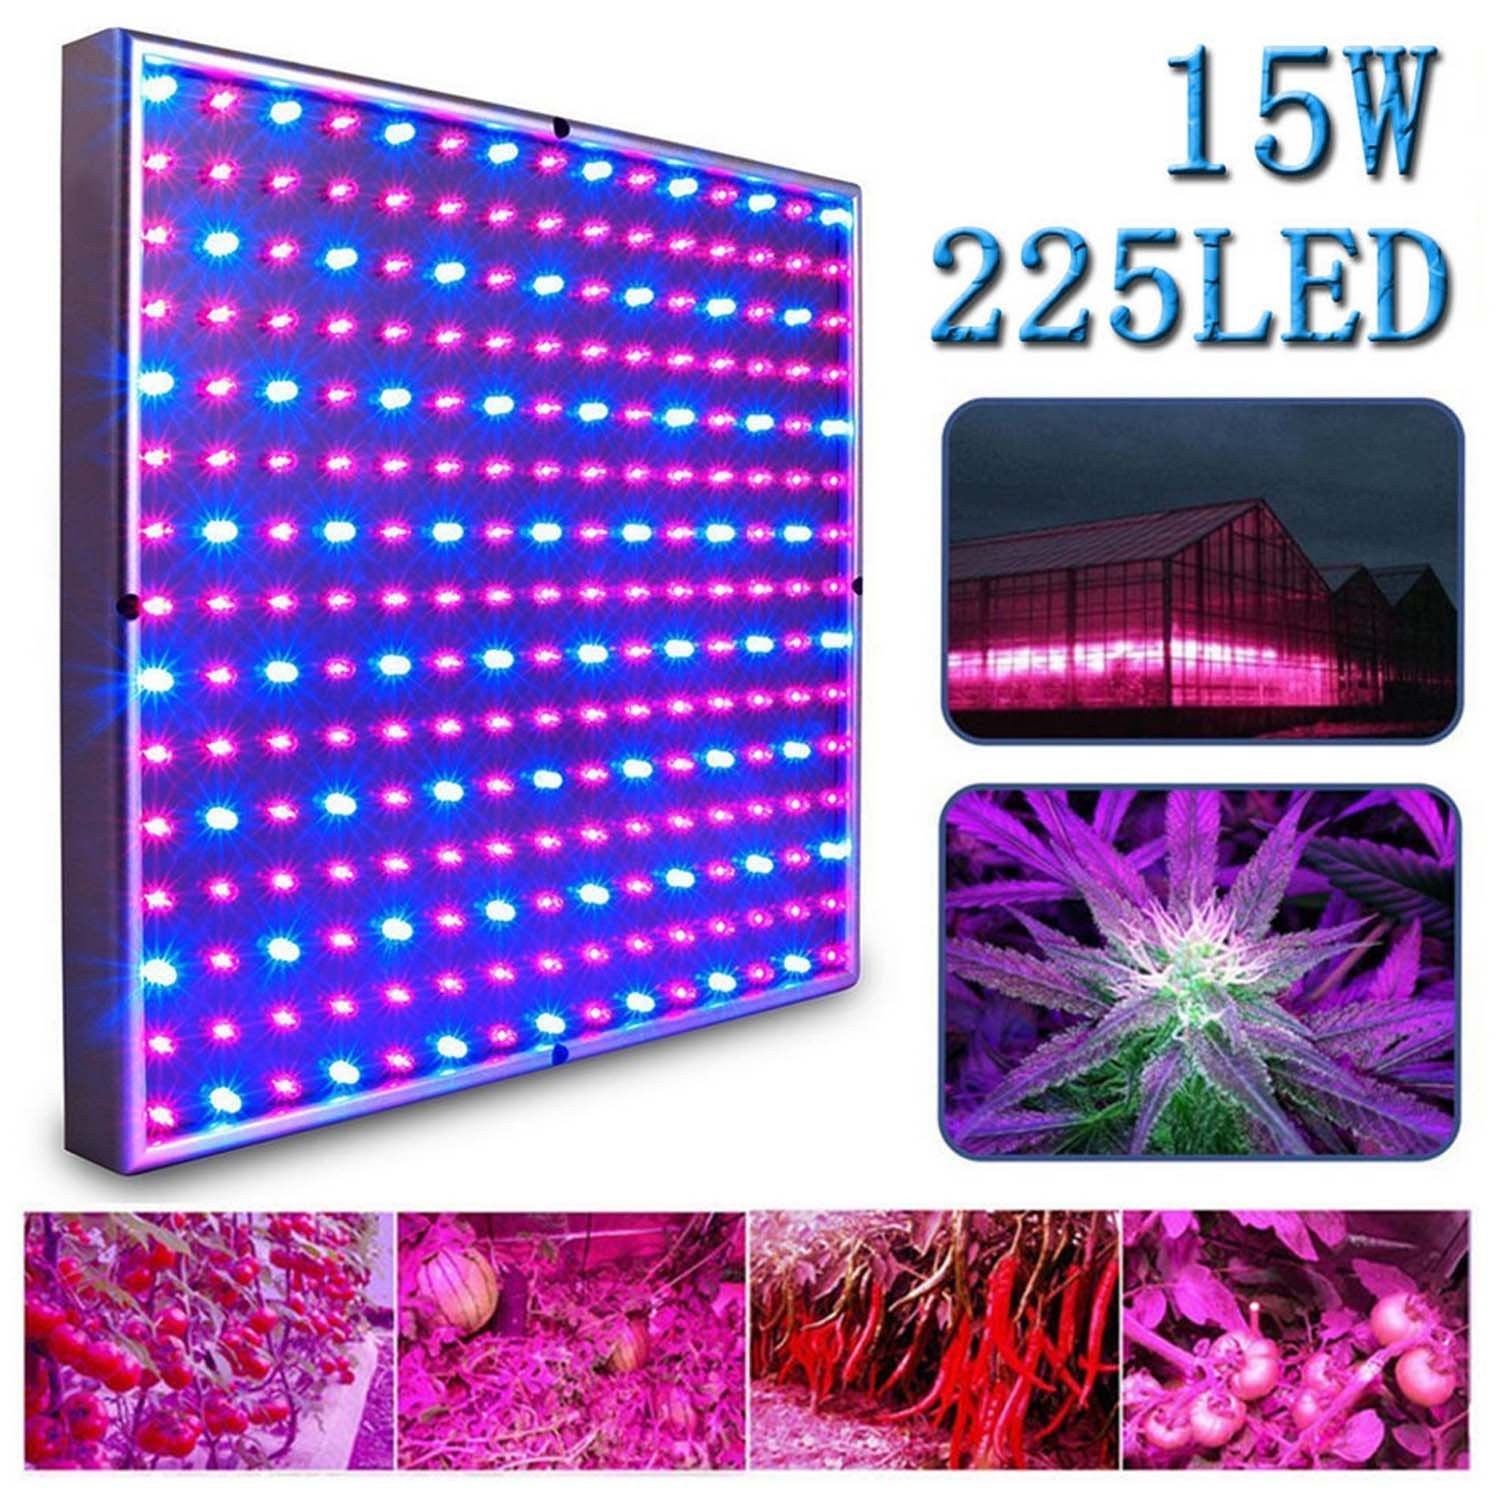 Kaleep LED Grow Light for Red Blue Indoor Garden Greenhouse and Hydroponic Full Spectrum Growing Lamps 15W Hanging Light - EarthCitizen
 - 1